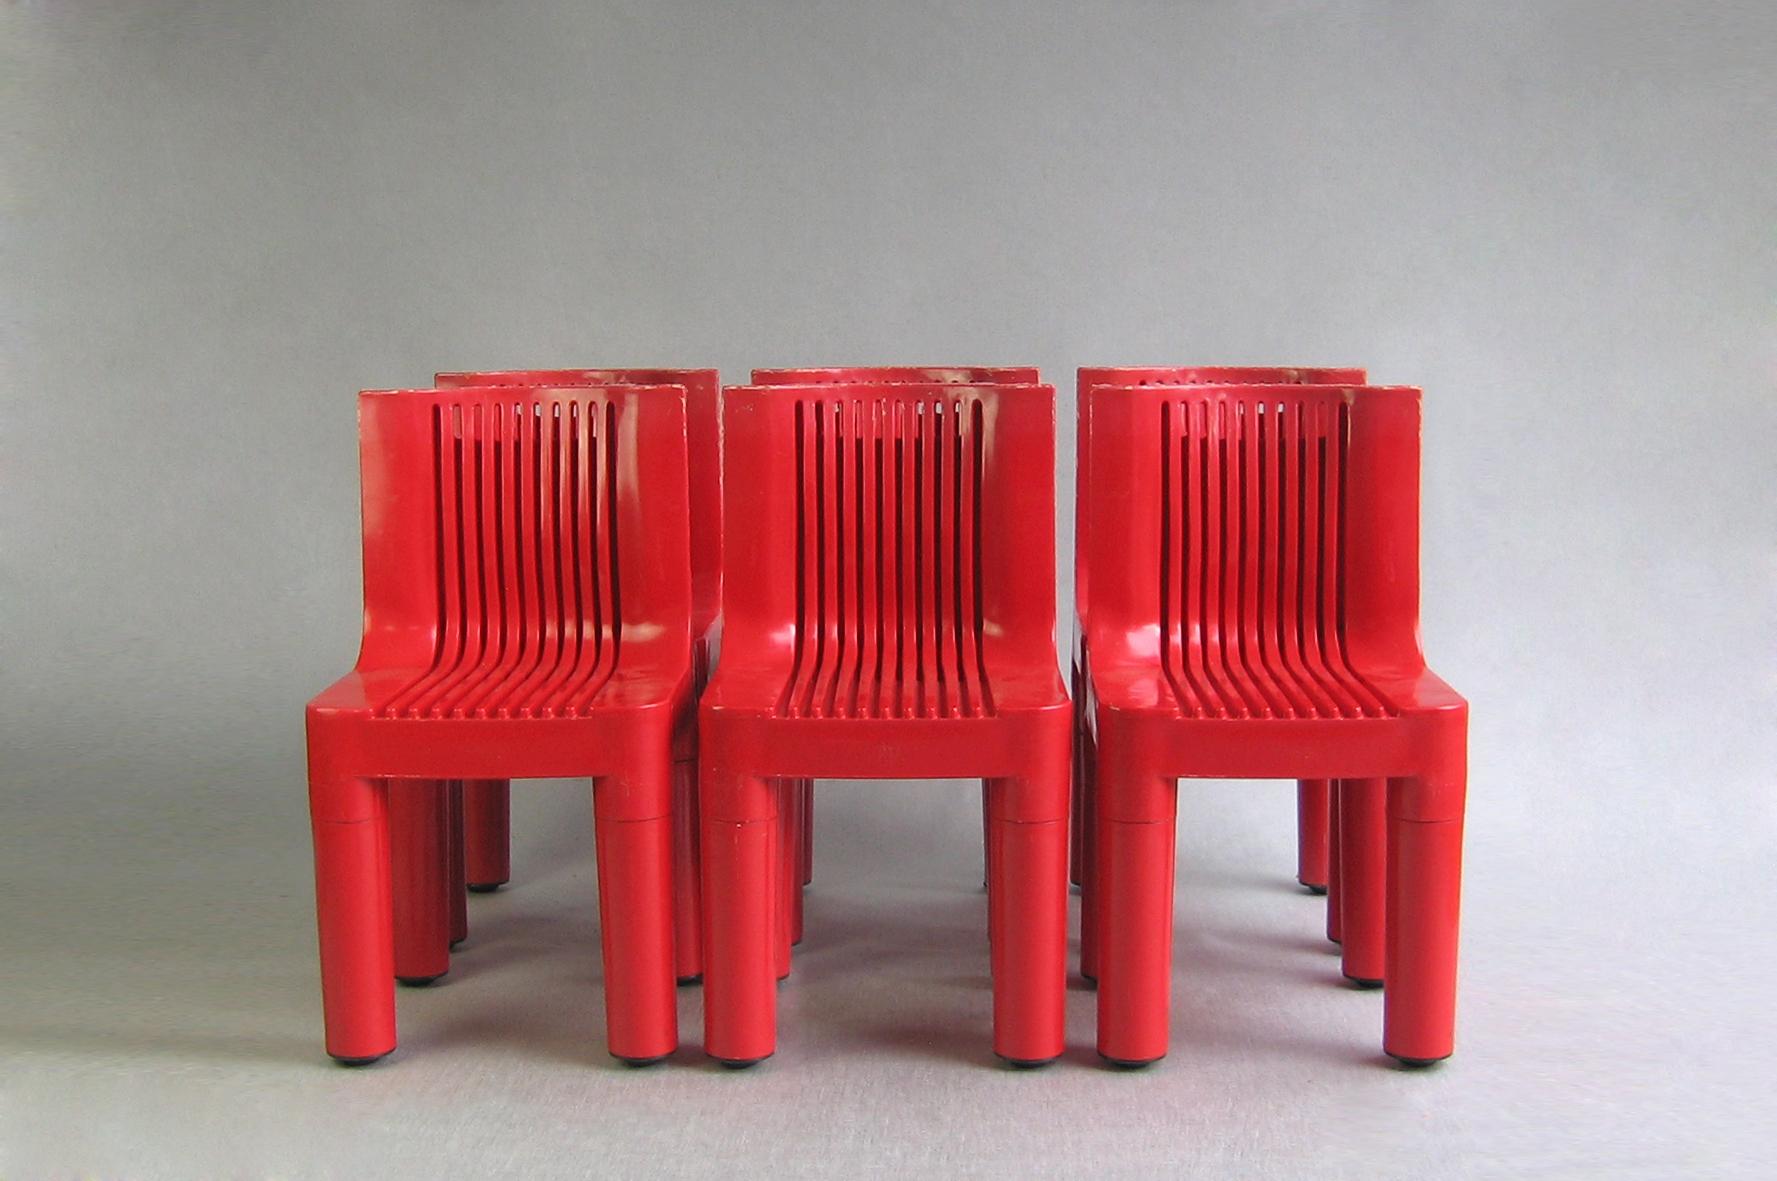 6x Chair model 4999/5 Kartell 
Marco Zanuso 1964 / Very rare original first production!

Chairs are in good vintage condition. Due to the age of the plastic, you will see some discoloration and wear on the plastic.

Zanuso opened an office in Milan